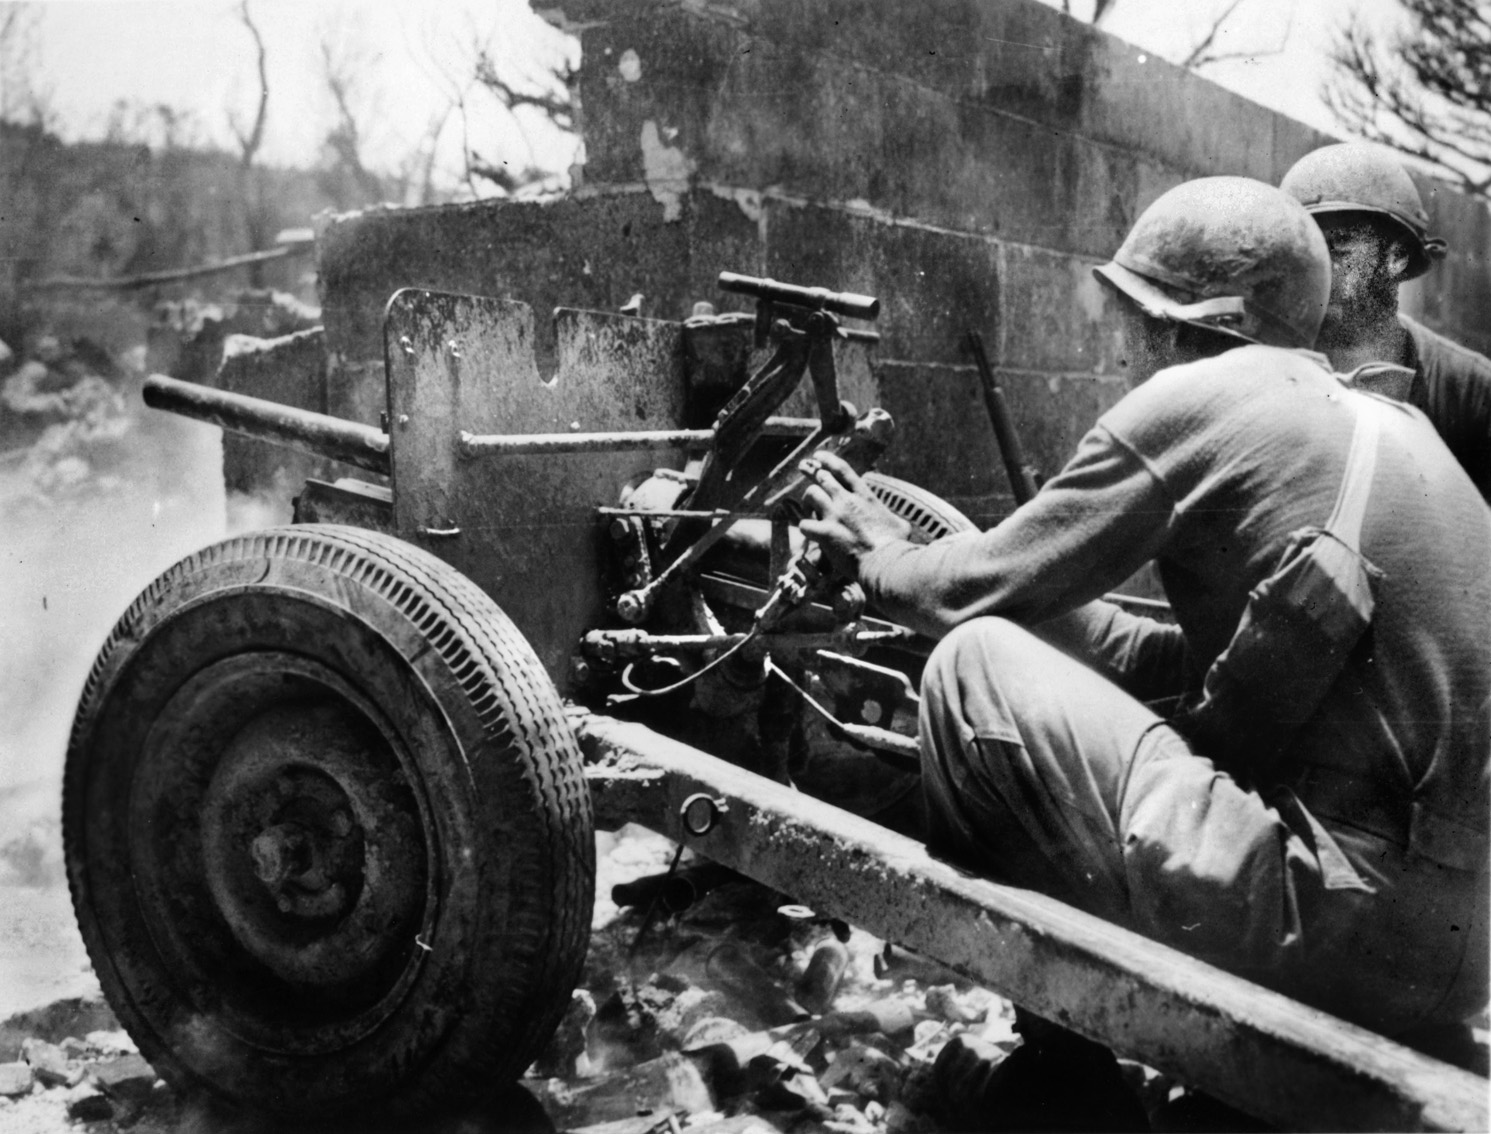 Partially sheltered by the ruins of a bombed out building, American soldiers of the 96th Infantry Division man a 37mm gun. 